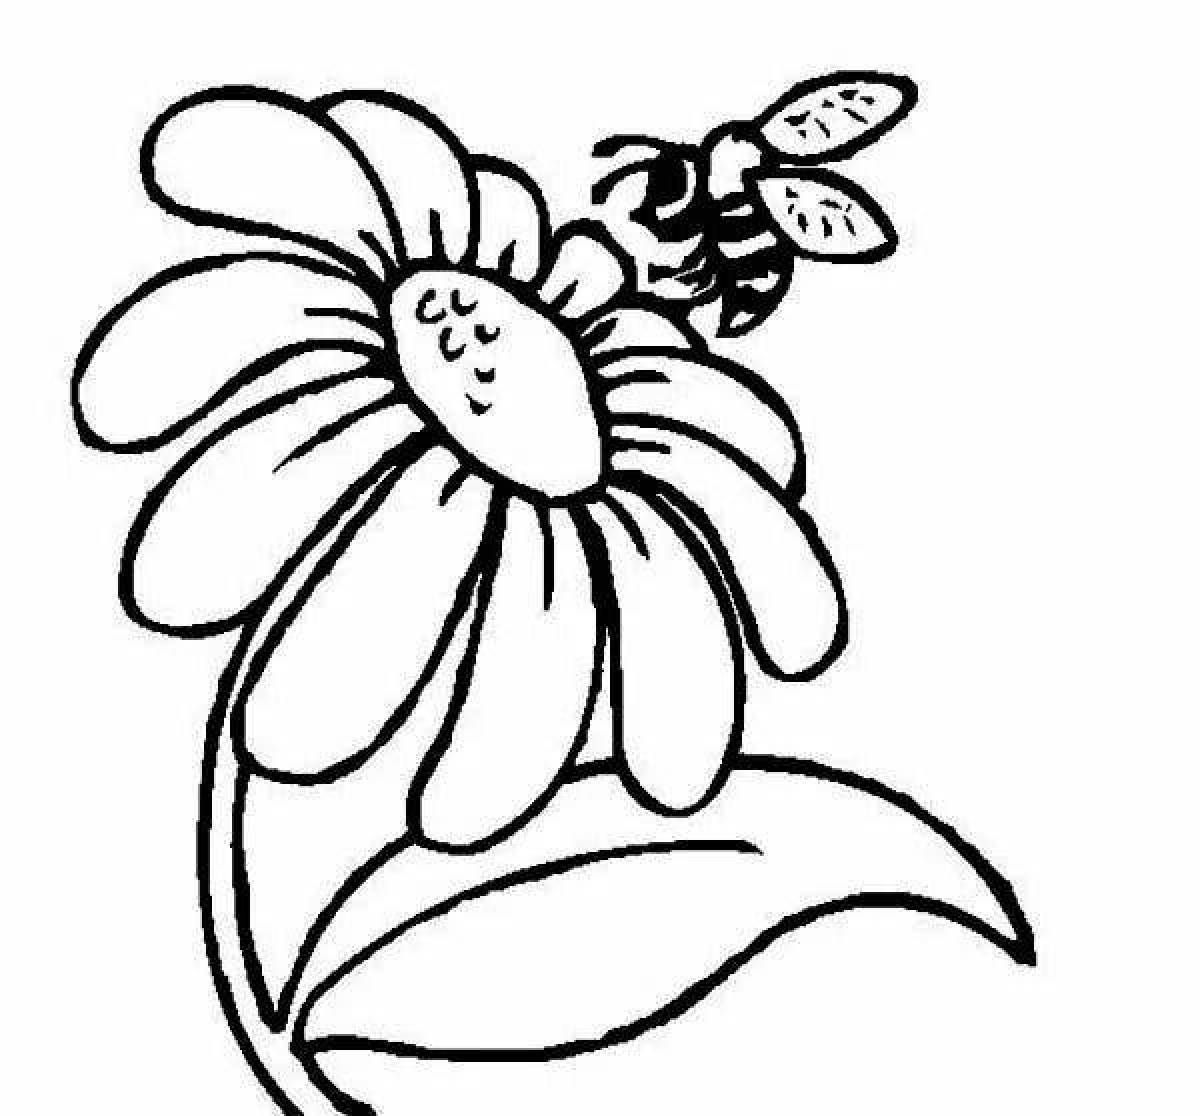 Coloring page blissful chamomile flowers